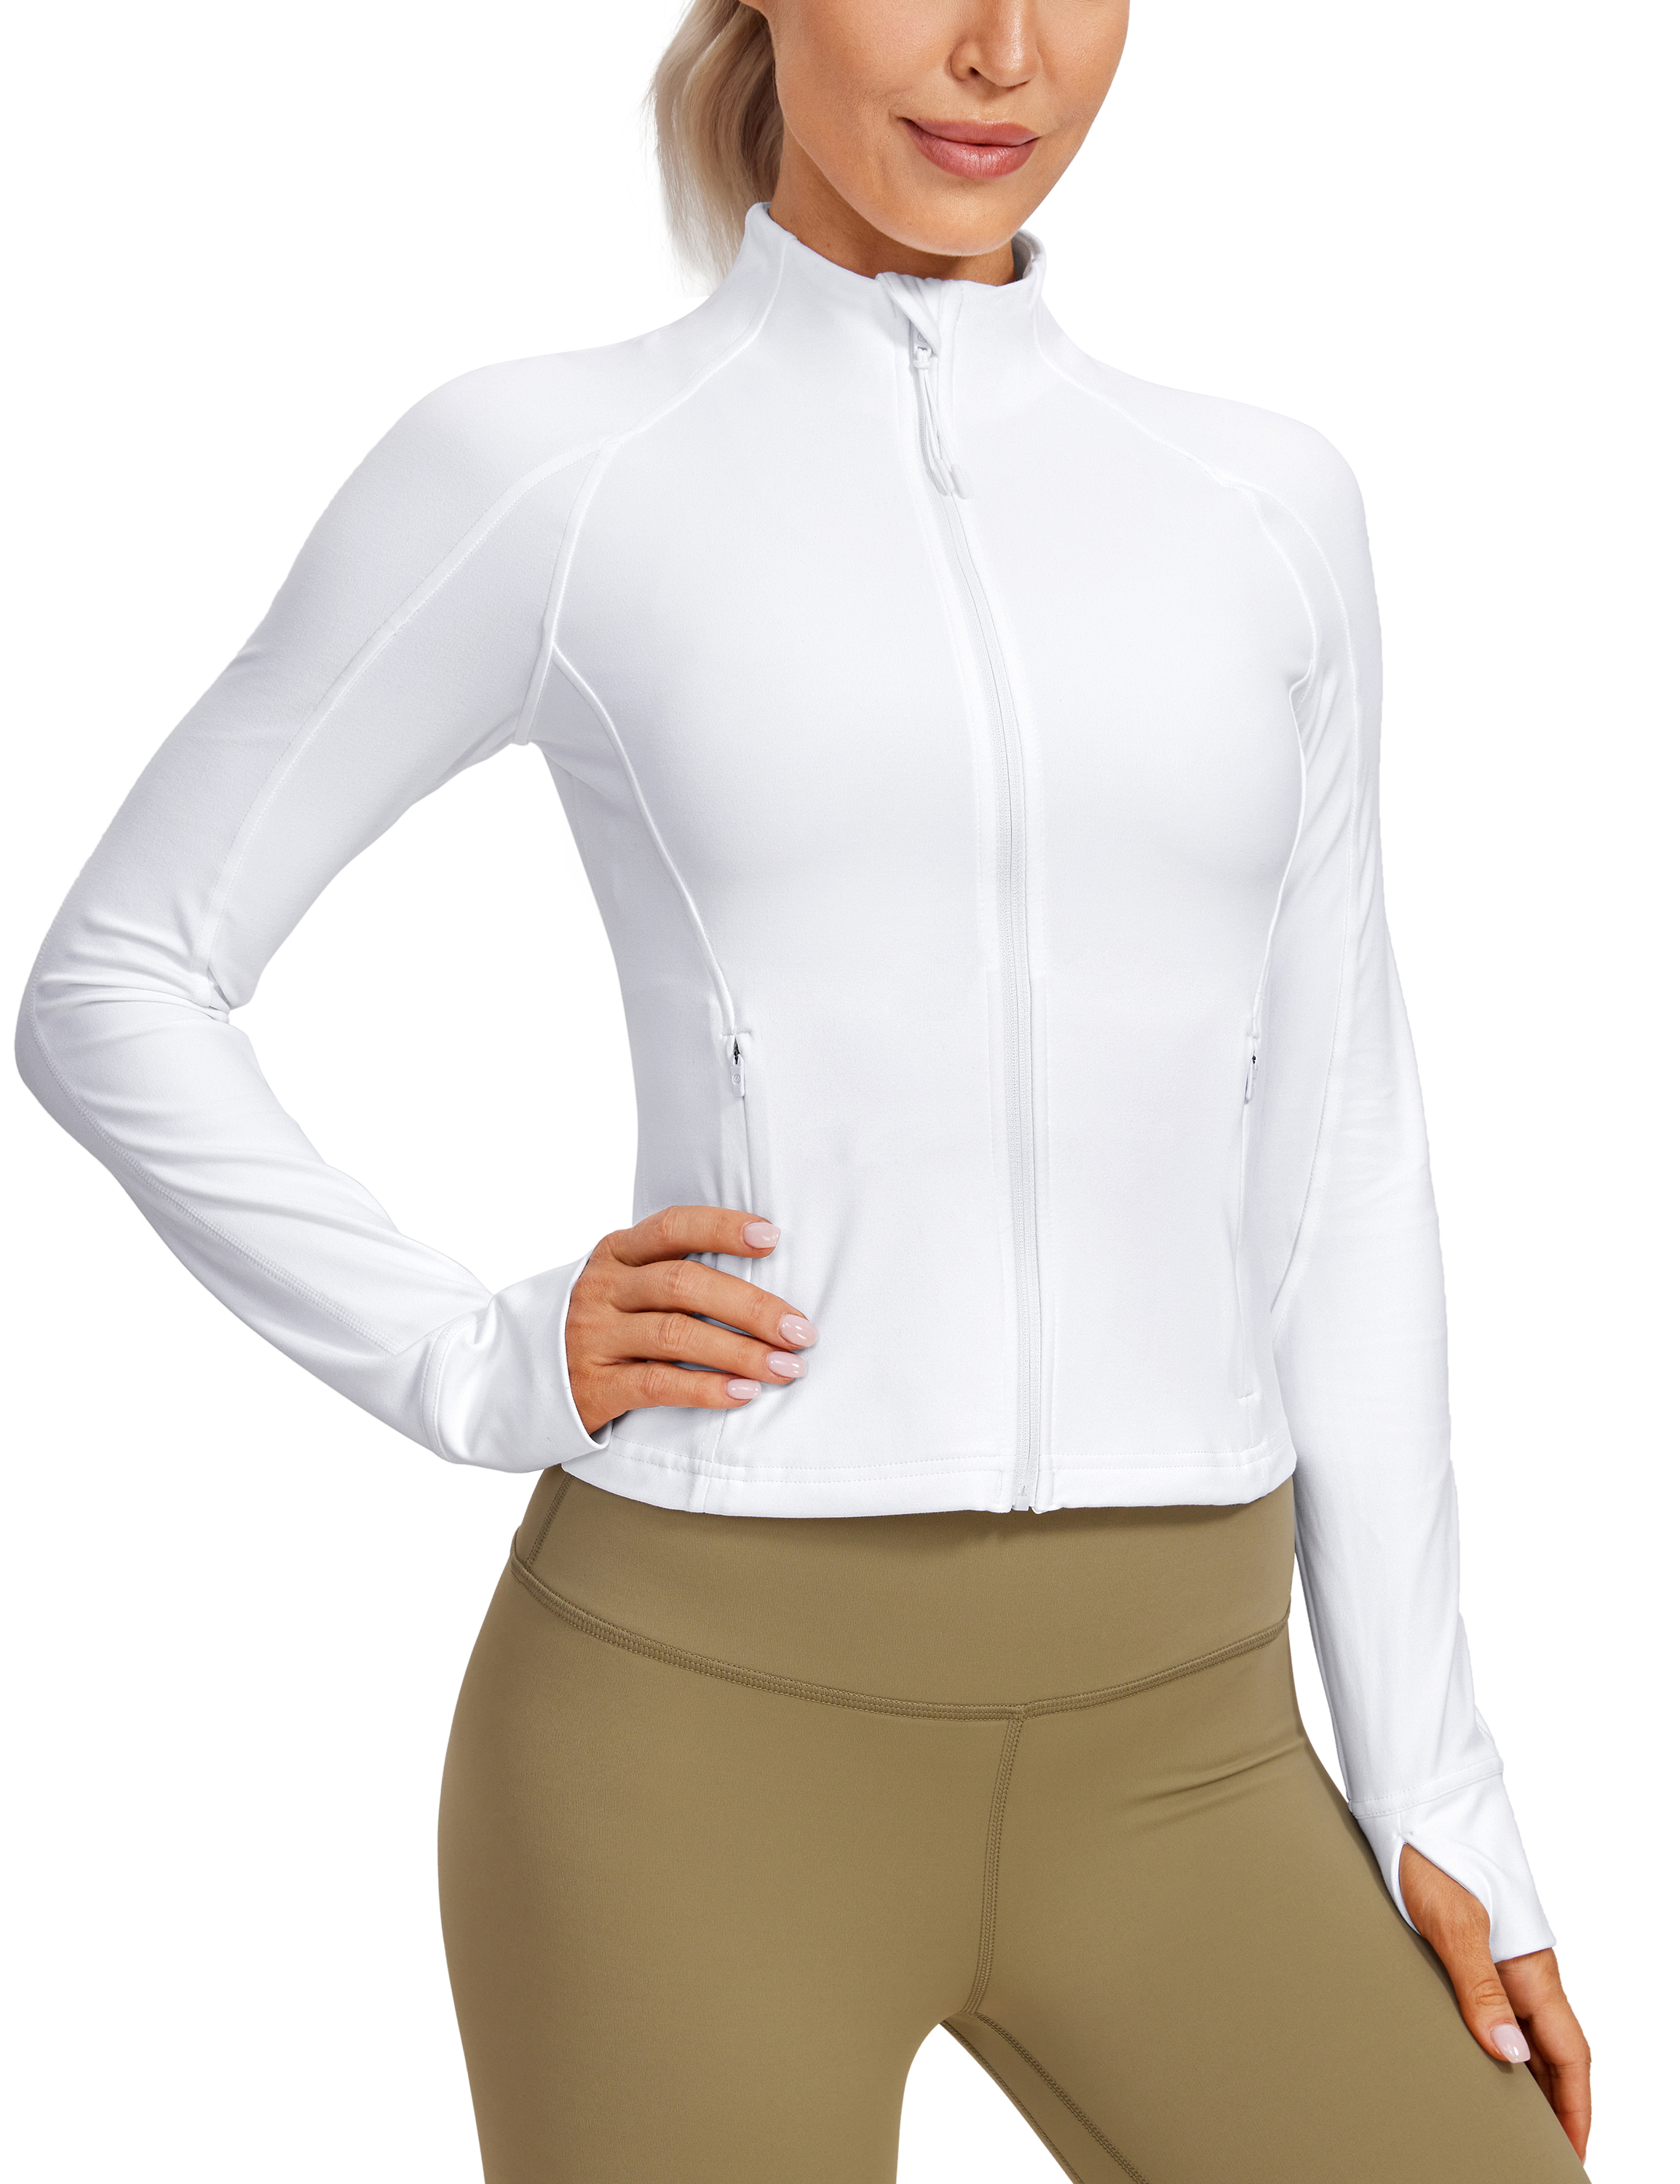 Fall in love with these Butterluxe Waist-Length Full Zip Jackets. Whic